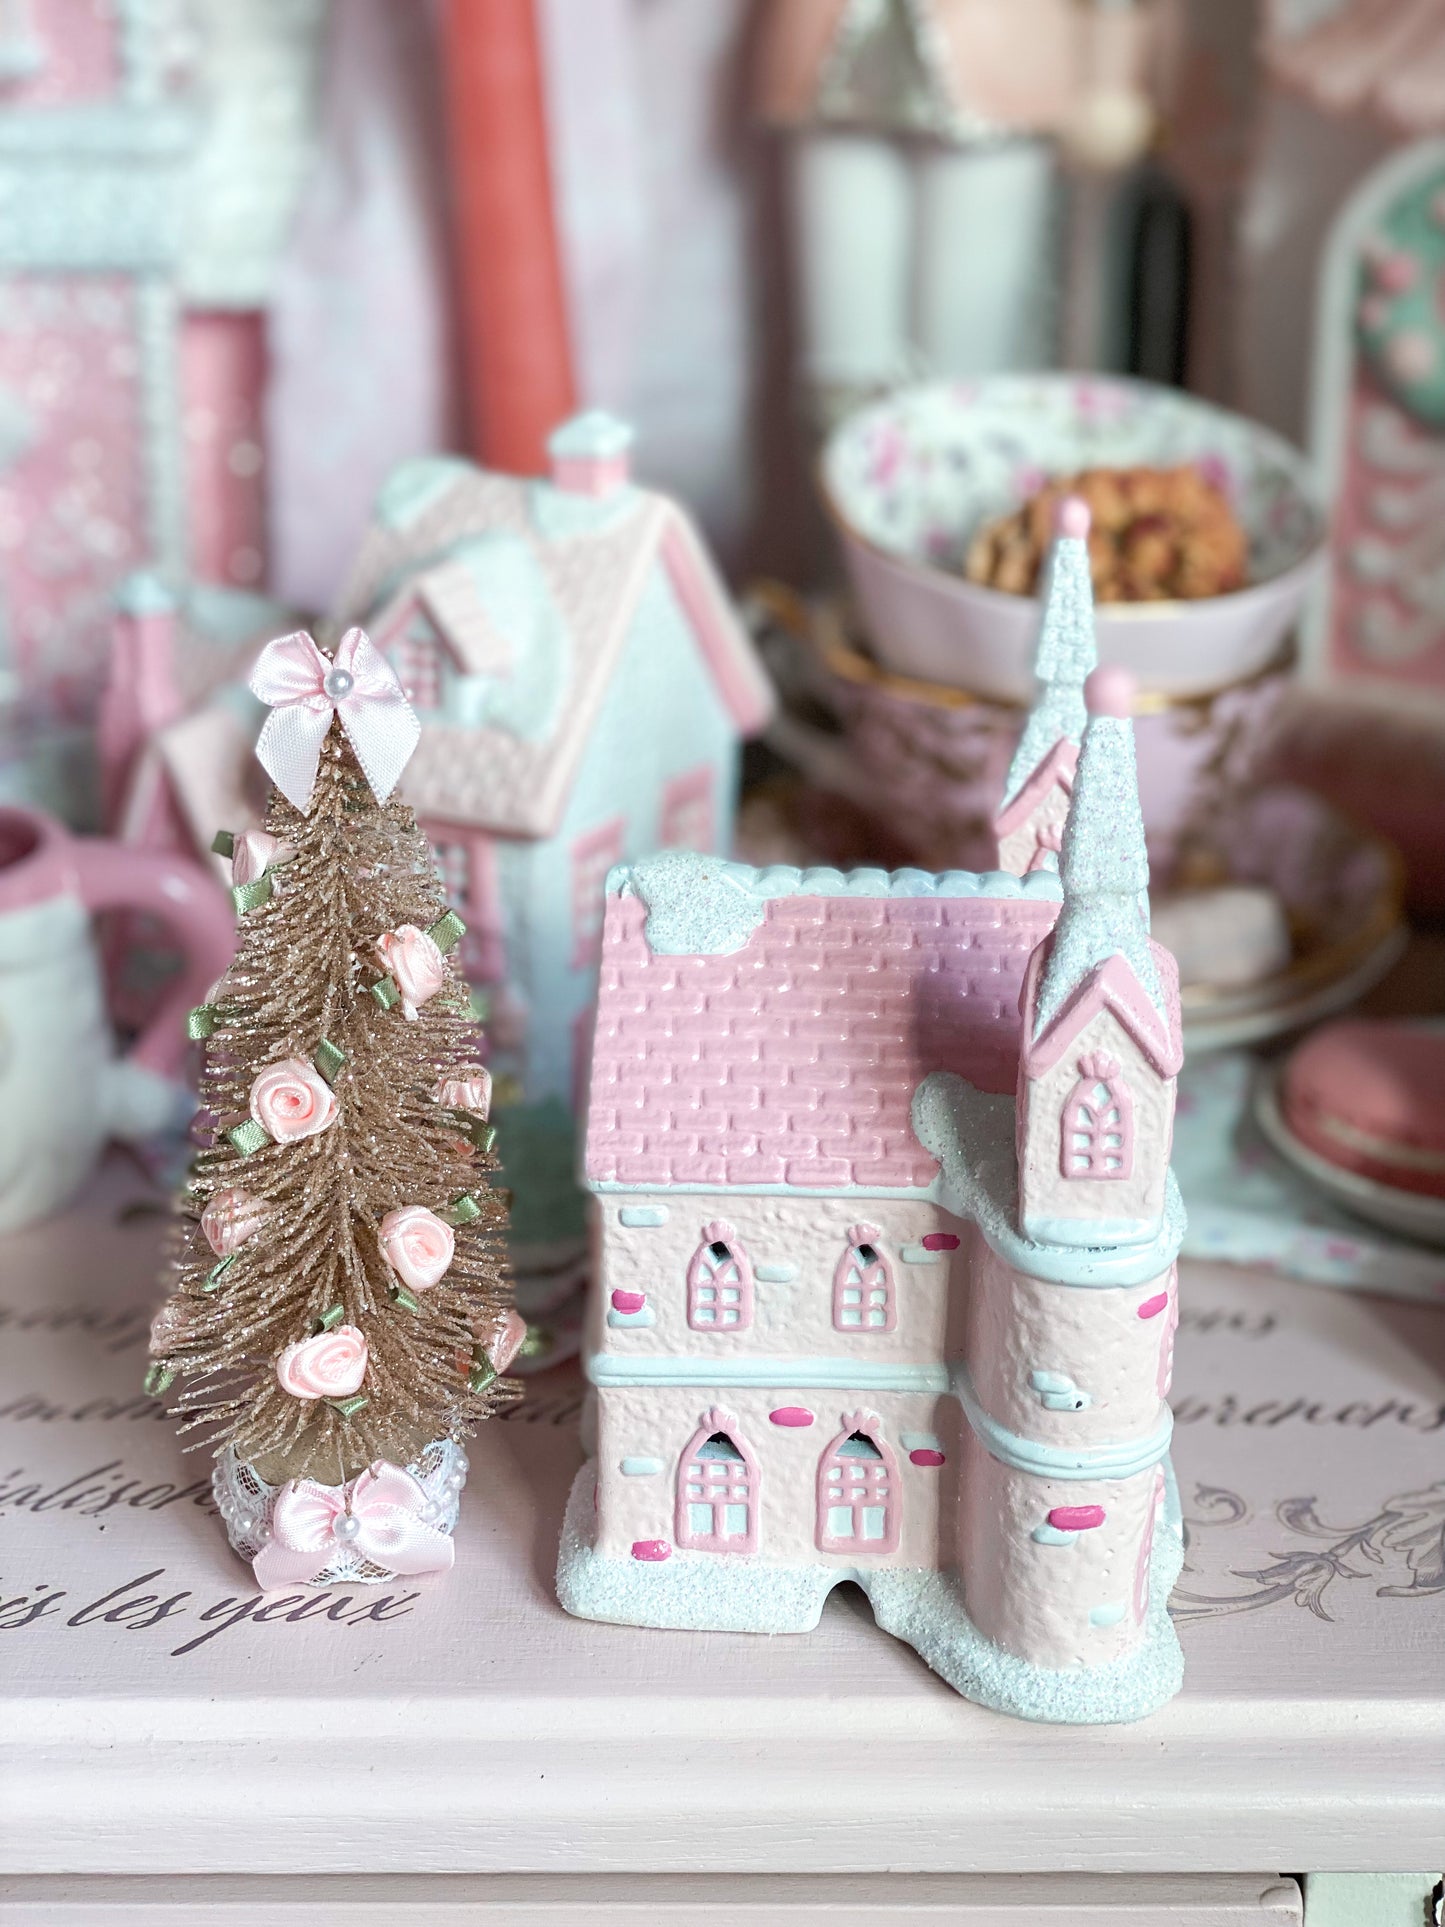 Bespoke Pastel Pink and White Petite Christmas Village Cathedral